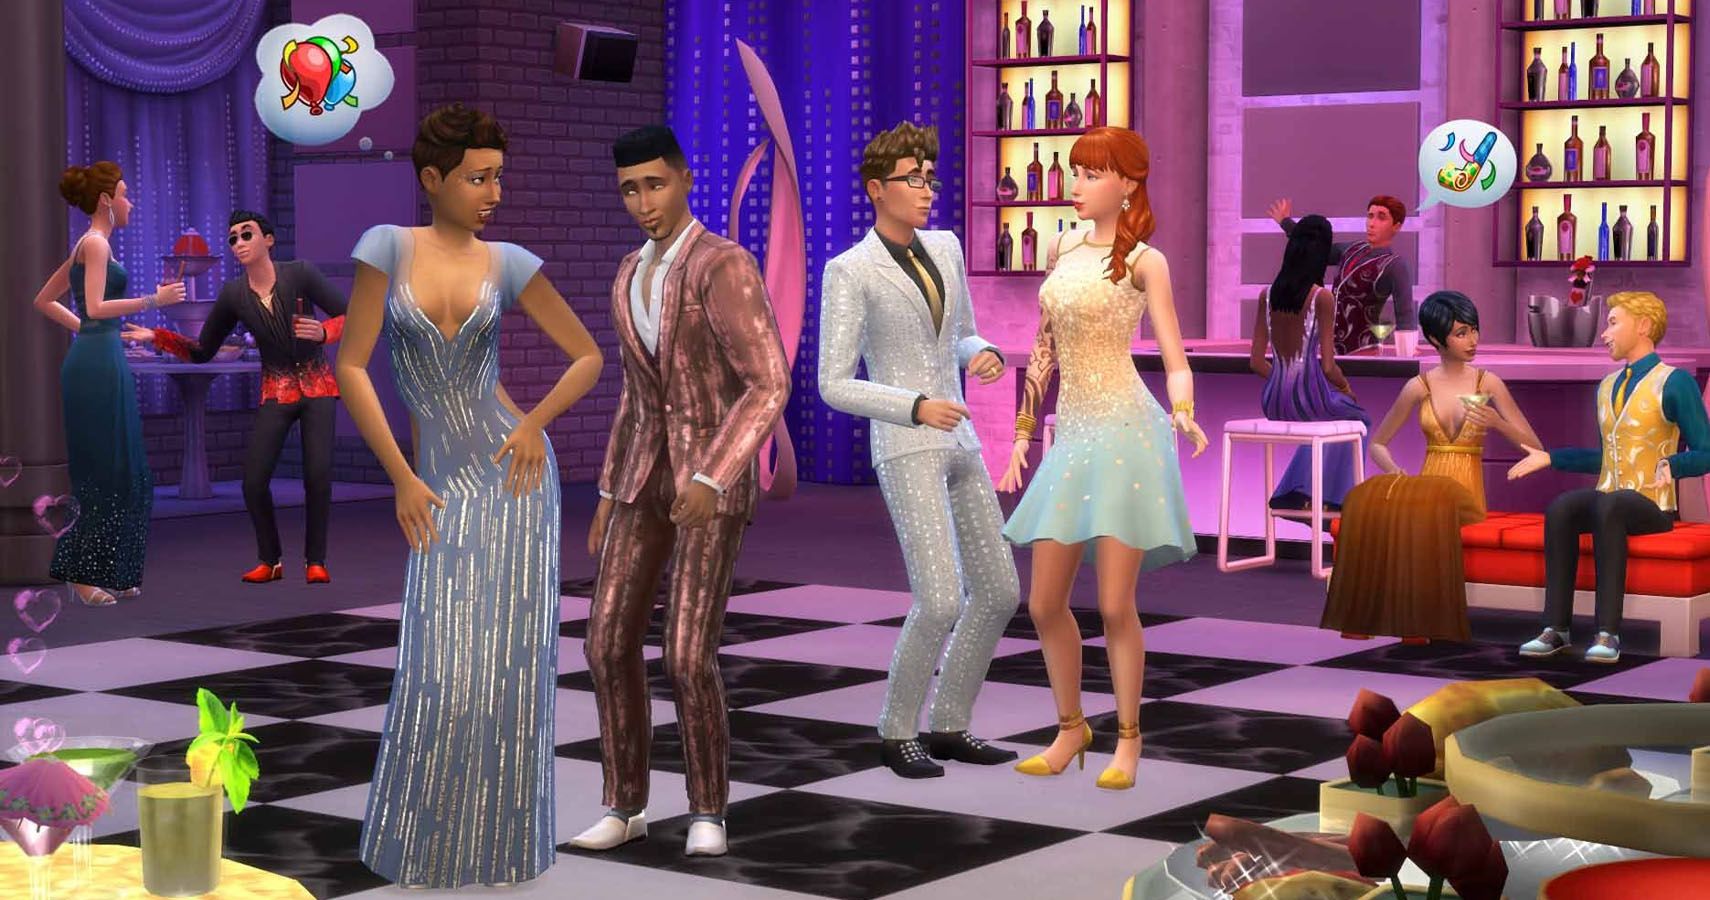 what items does the sims 4 luxury stuff pack have